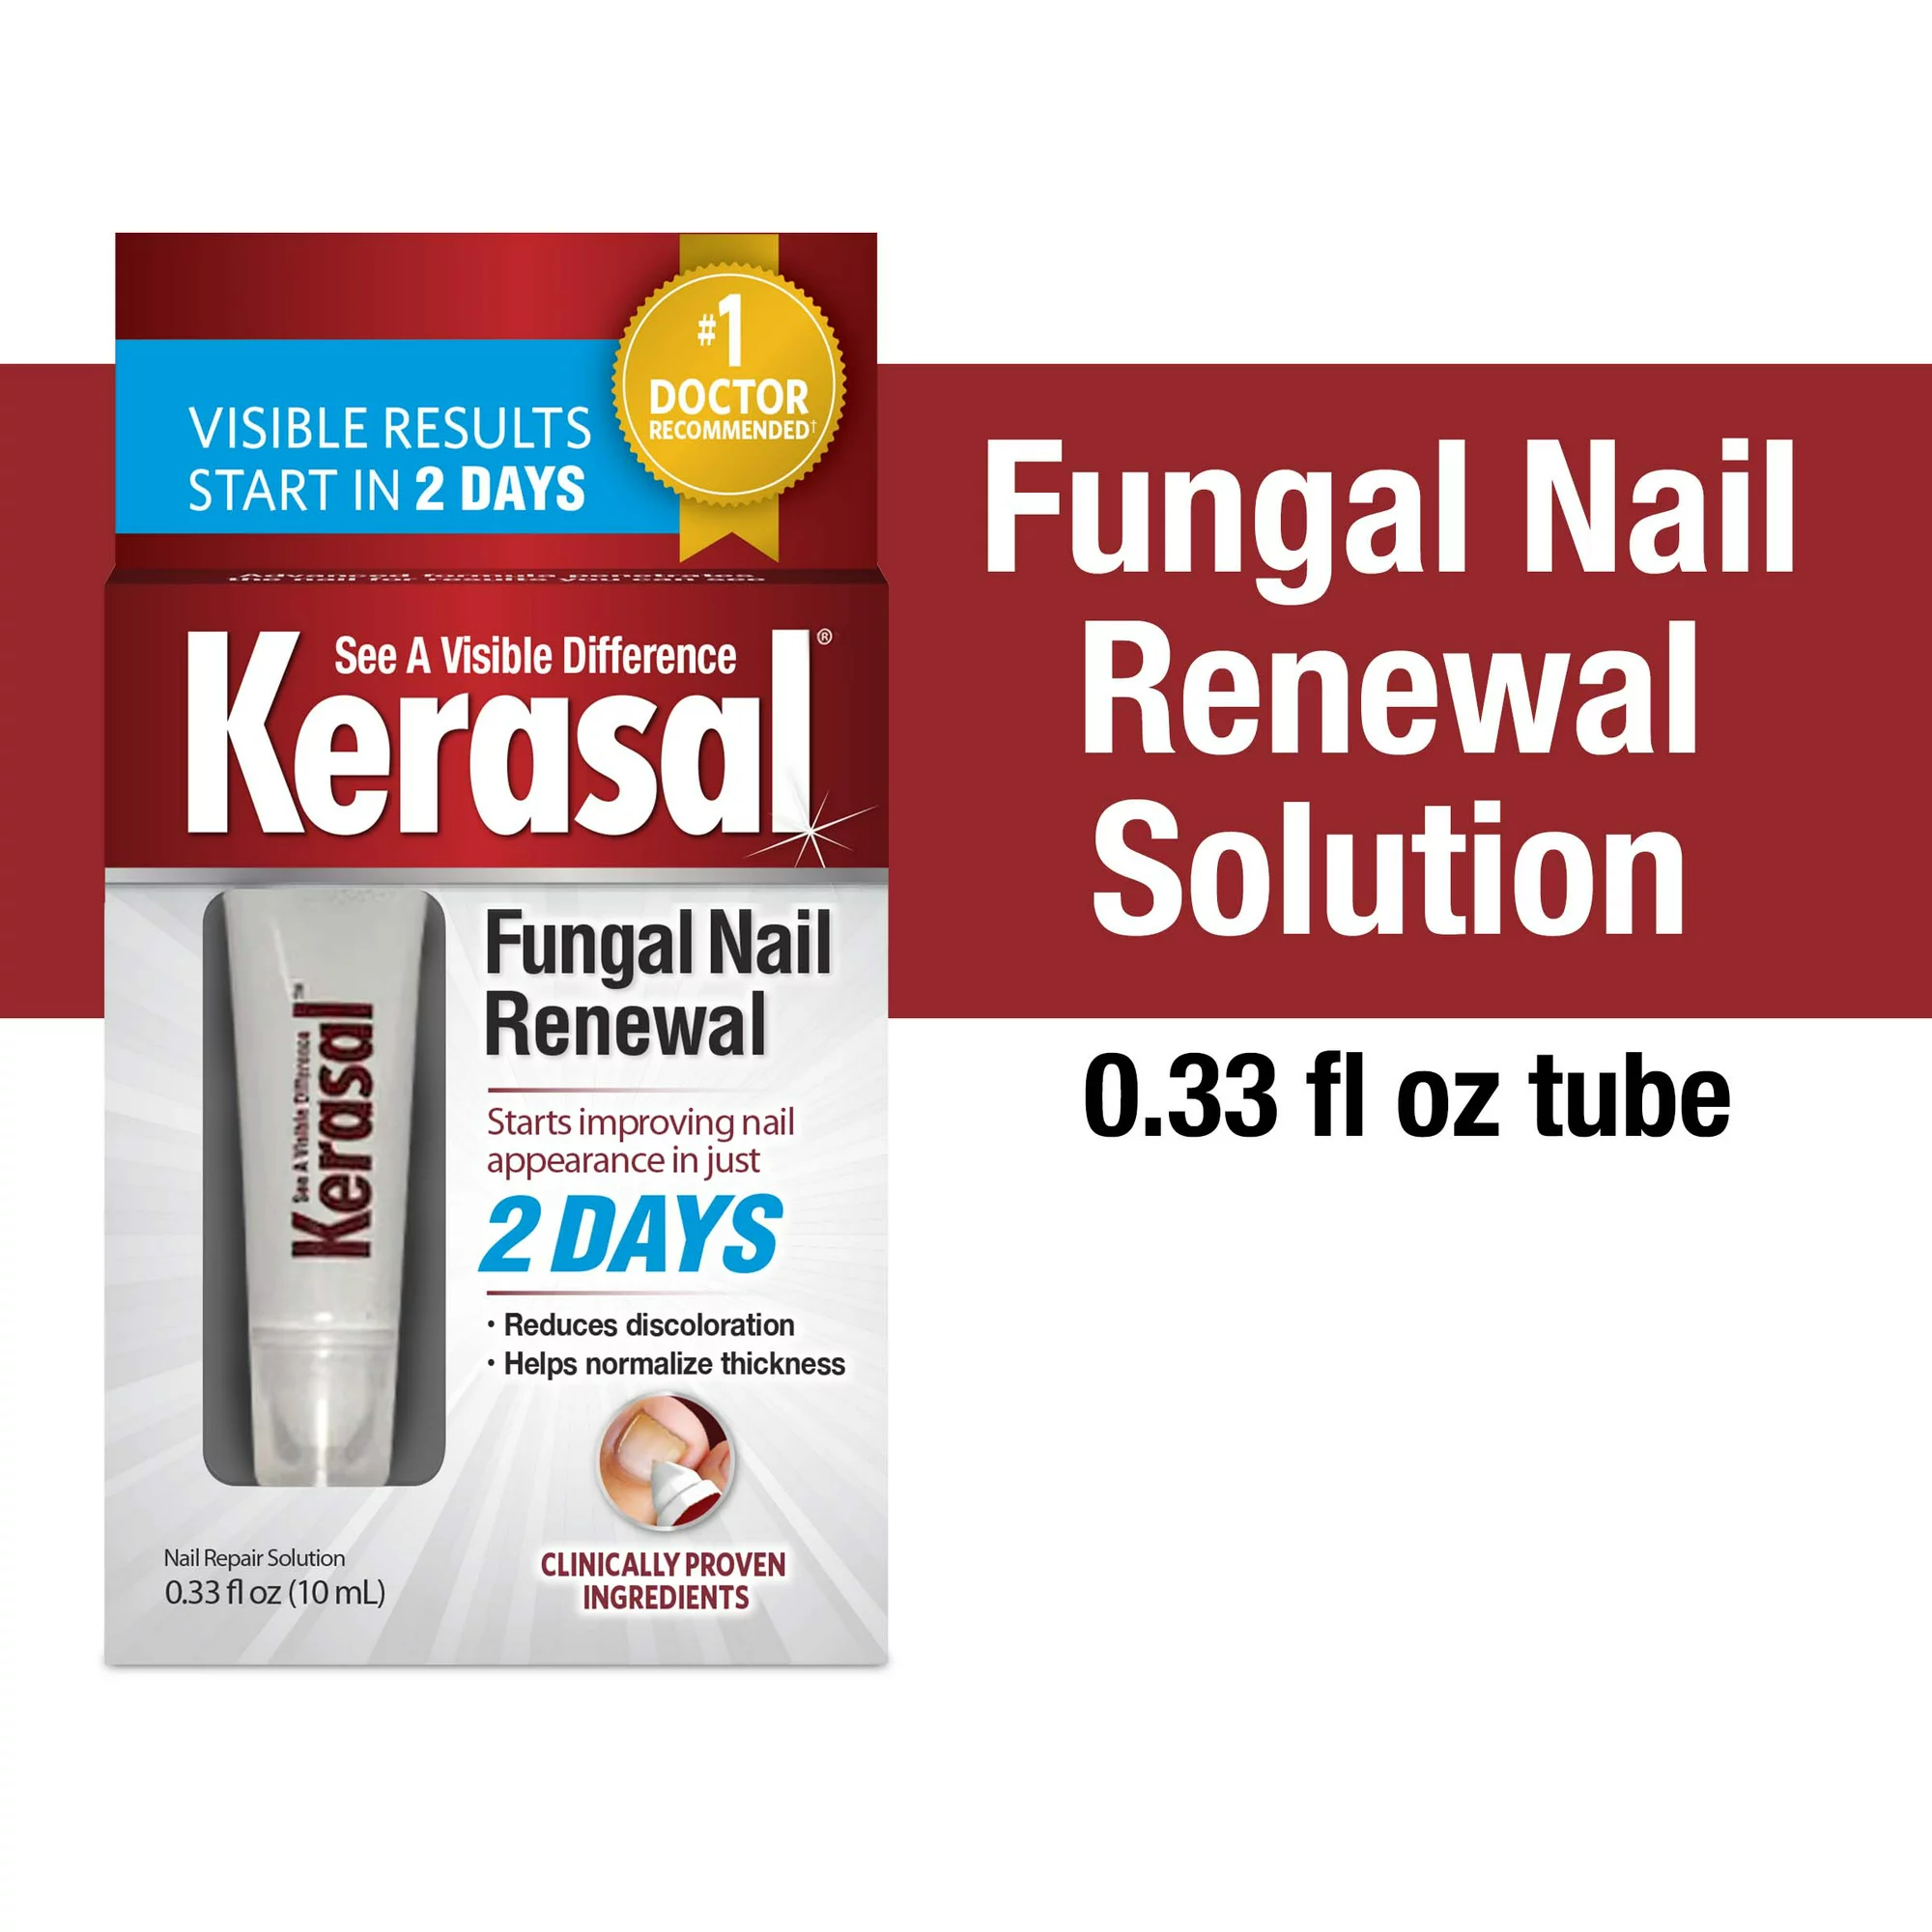 Transform your feet and nails with Kerasal, our fungal nail renewal solution.